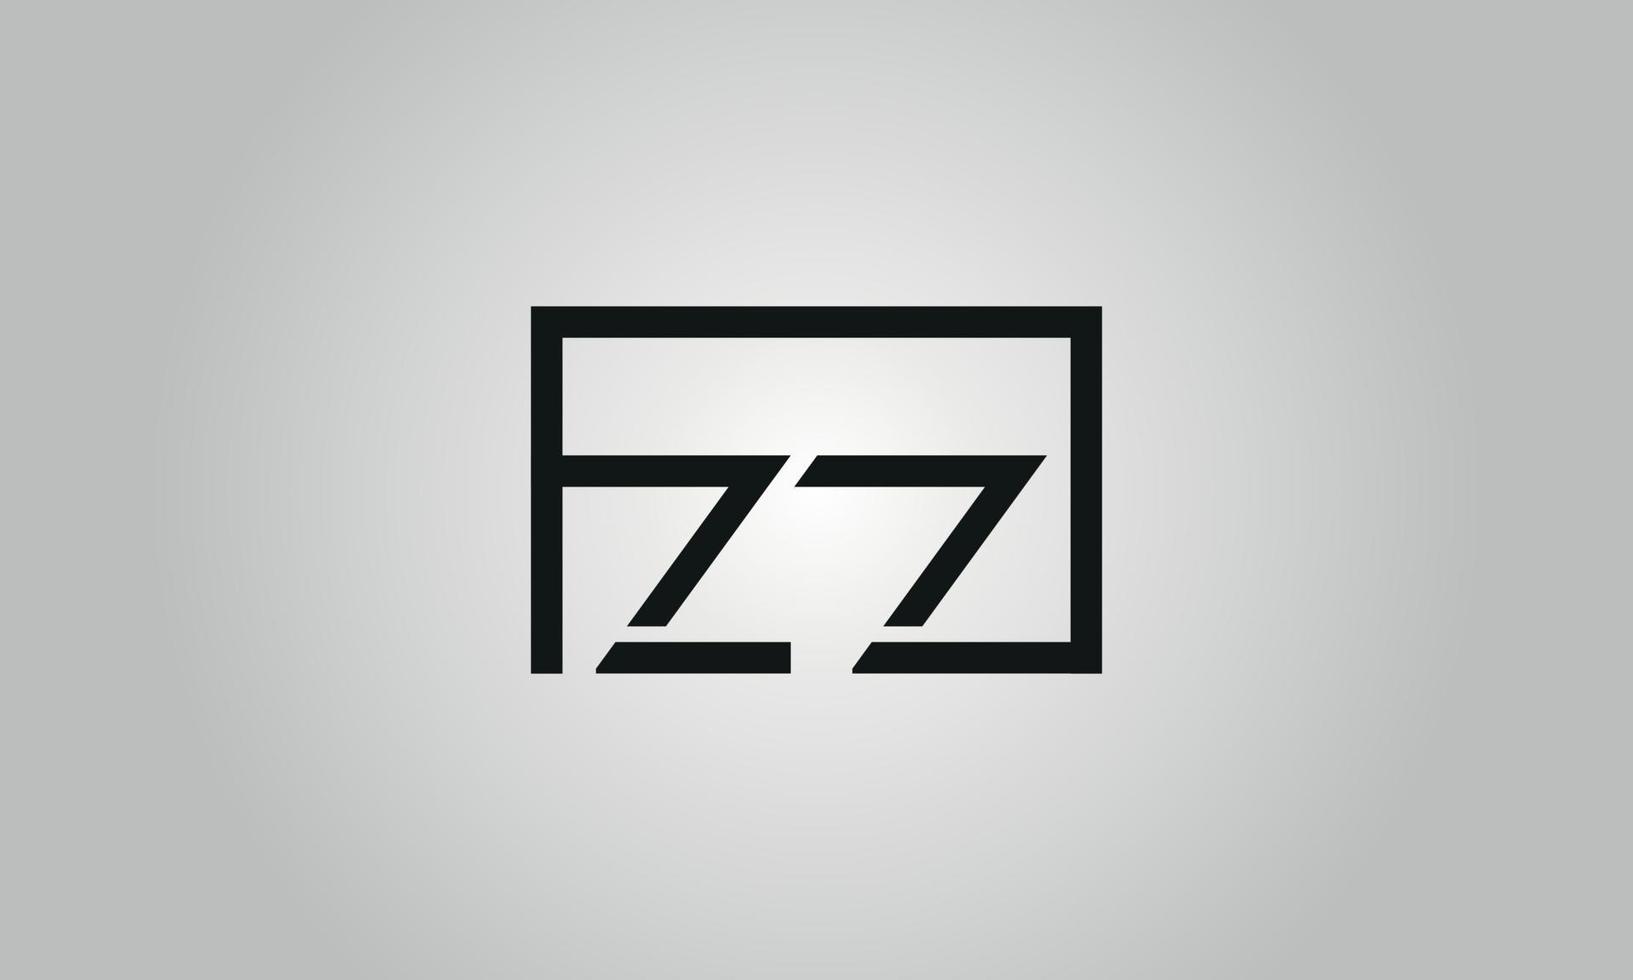 Letter ZZ logo design. ZZ logo with square shape in black colors vector free vector template.